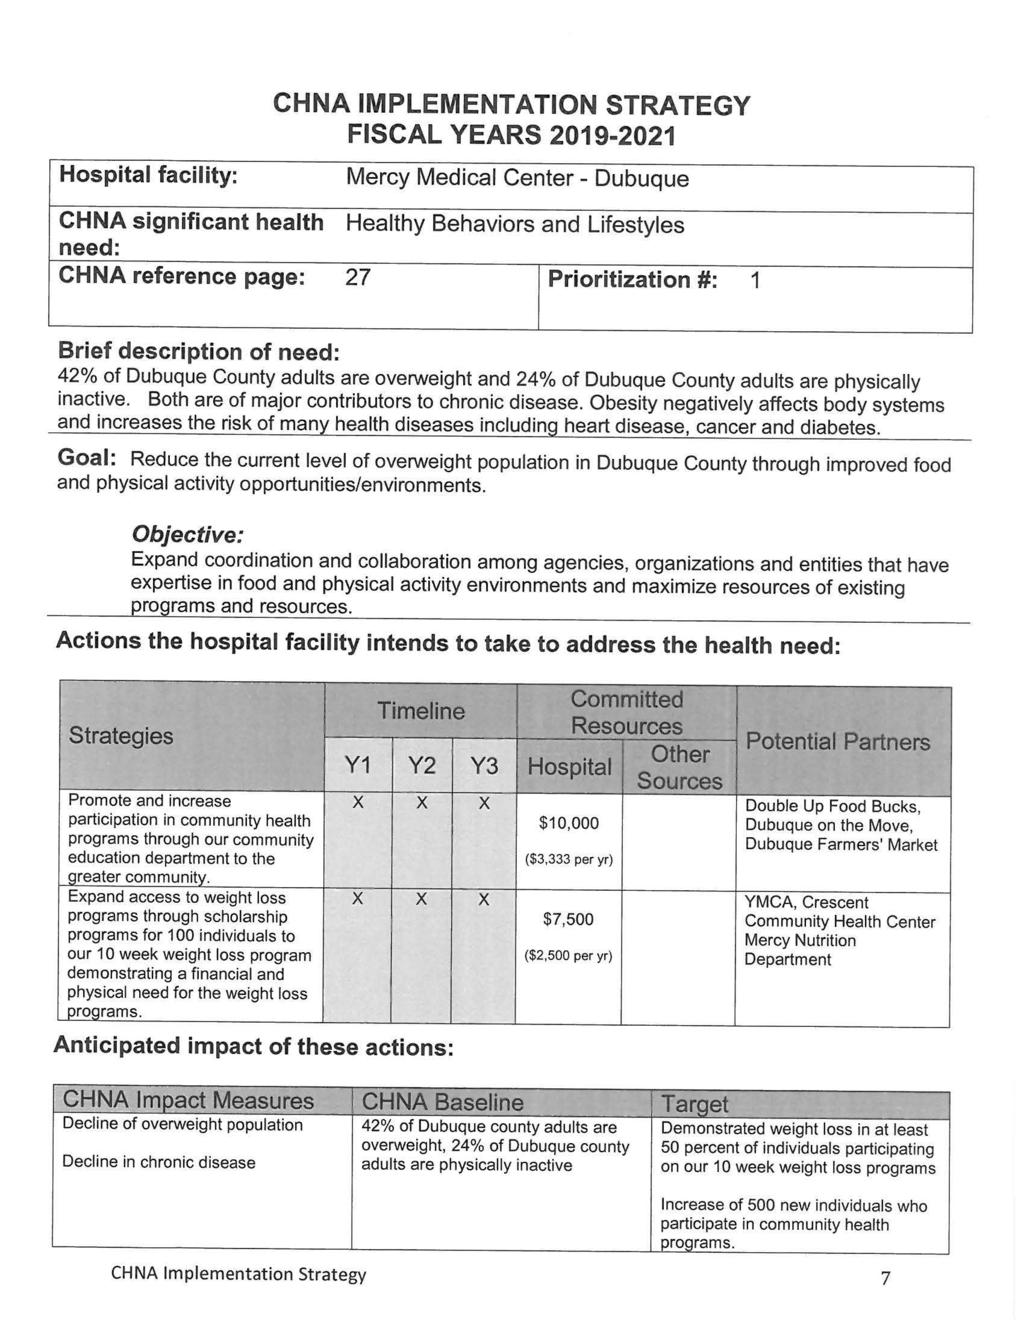 Hospital facility: CHNA IMPLEMENTATION STRATEGY FISCAL YEARS 2019-2021 Mercy Medical Center - Dubuque CHNA significant health Healthy Behaviors and Lifestyles need: CHNA reference page: 27